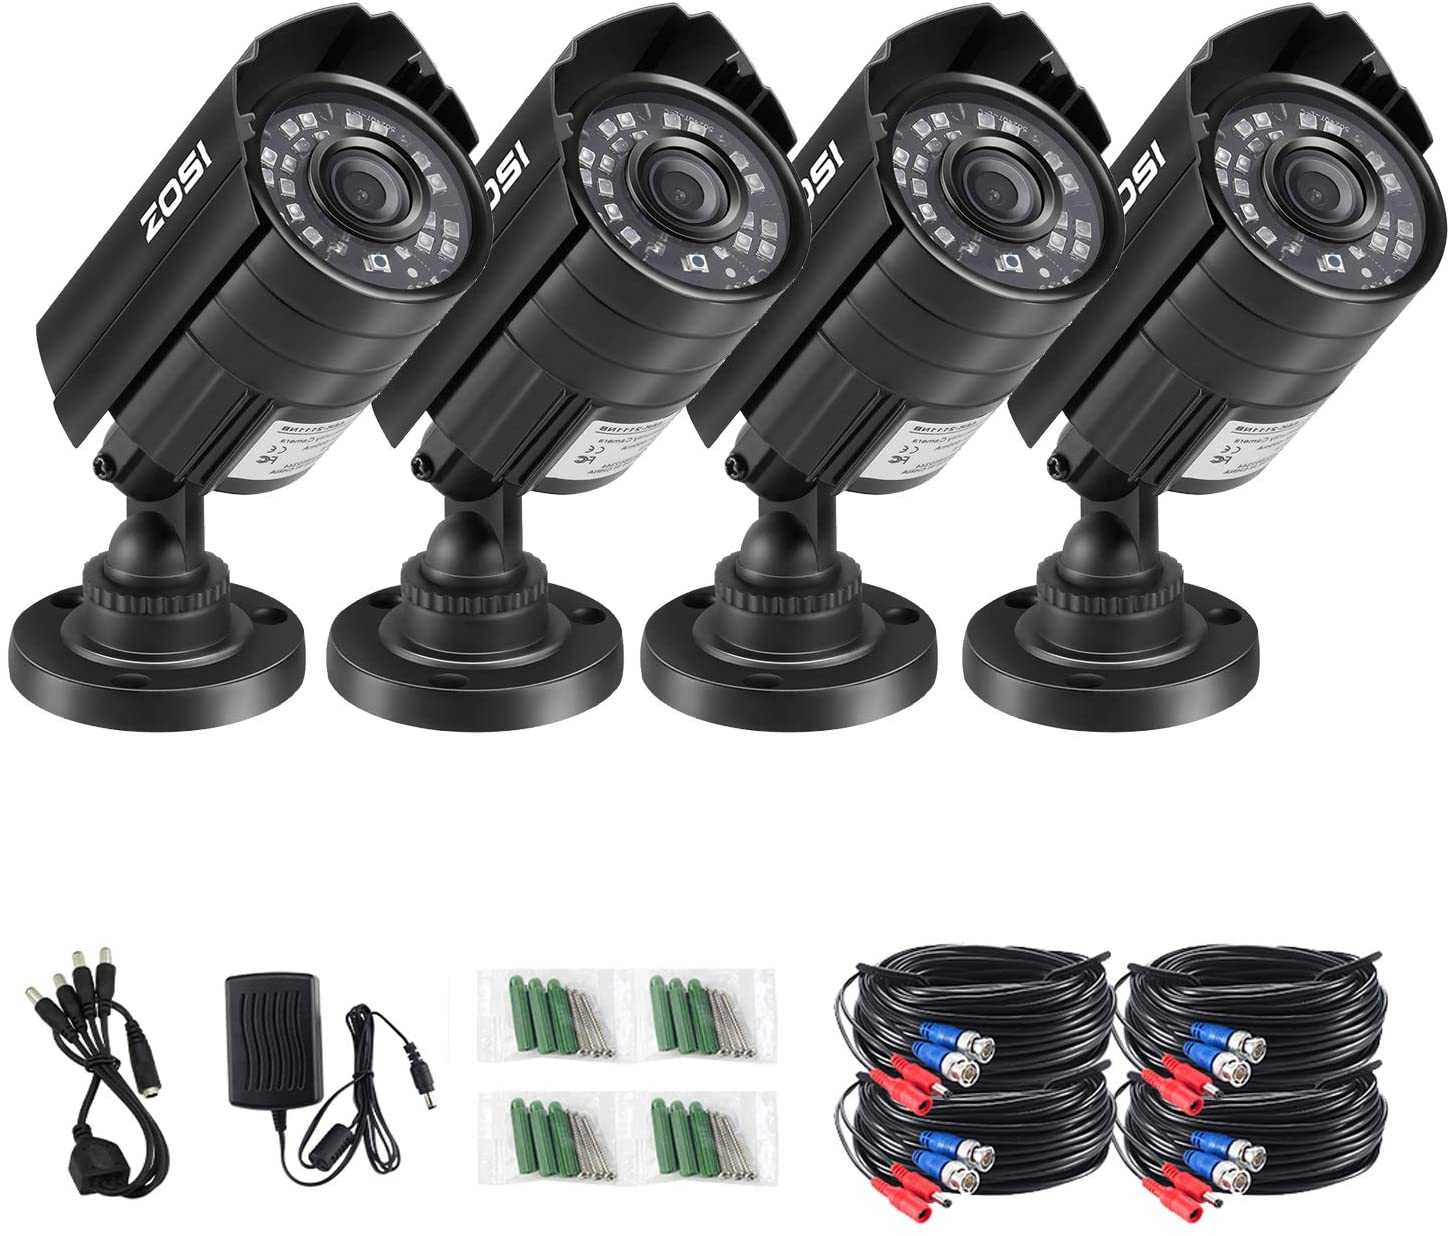 bunker hill security wireless camera system